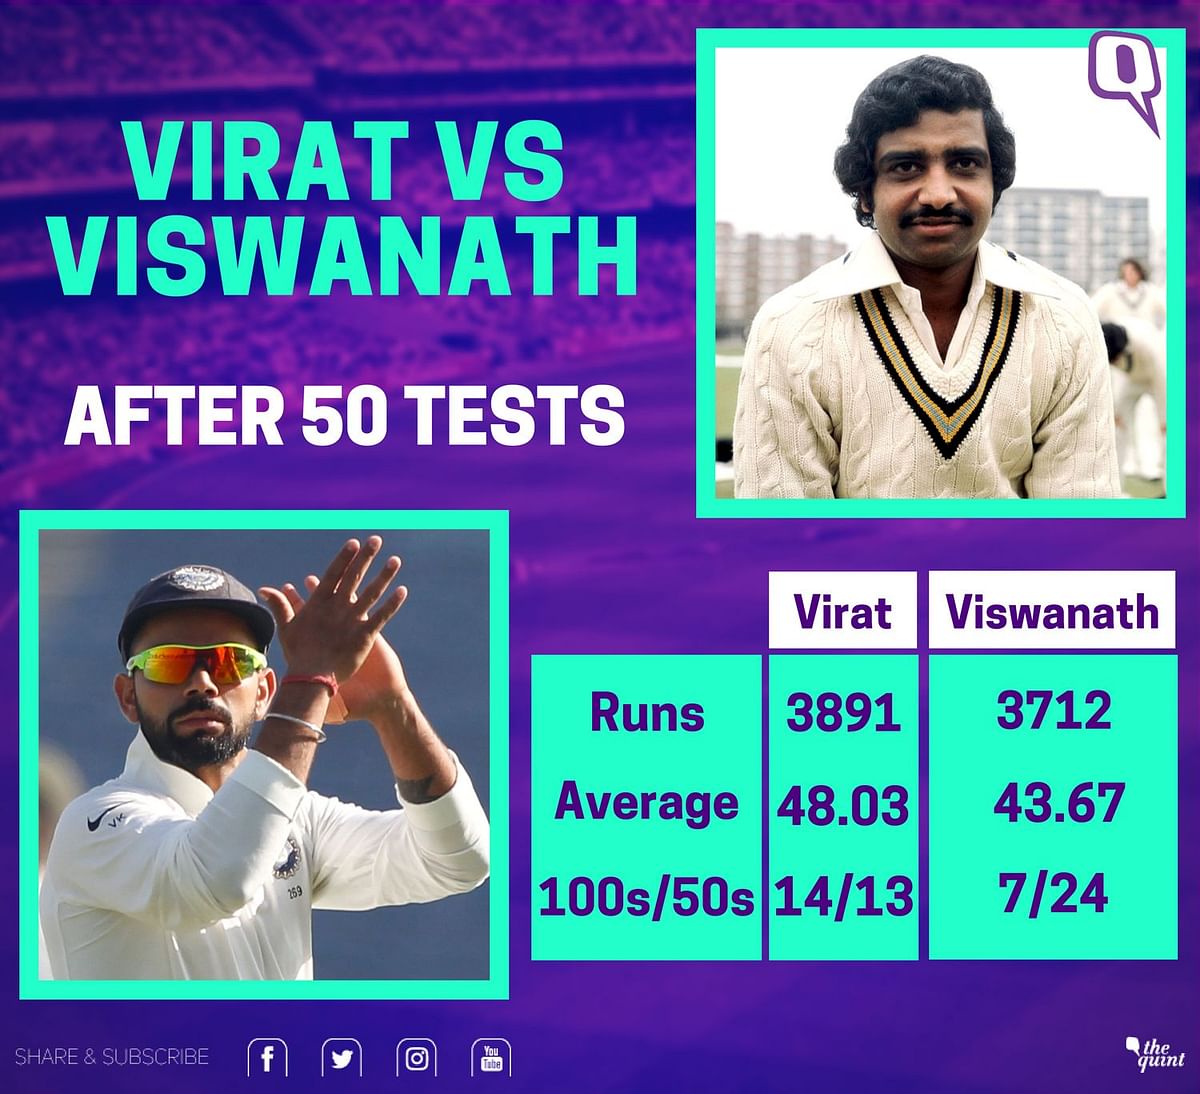 Sunil Gavaskar was so much in awe of Viswanath that he named his son after him.